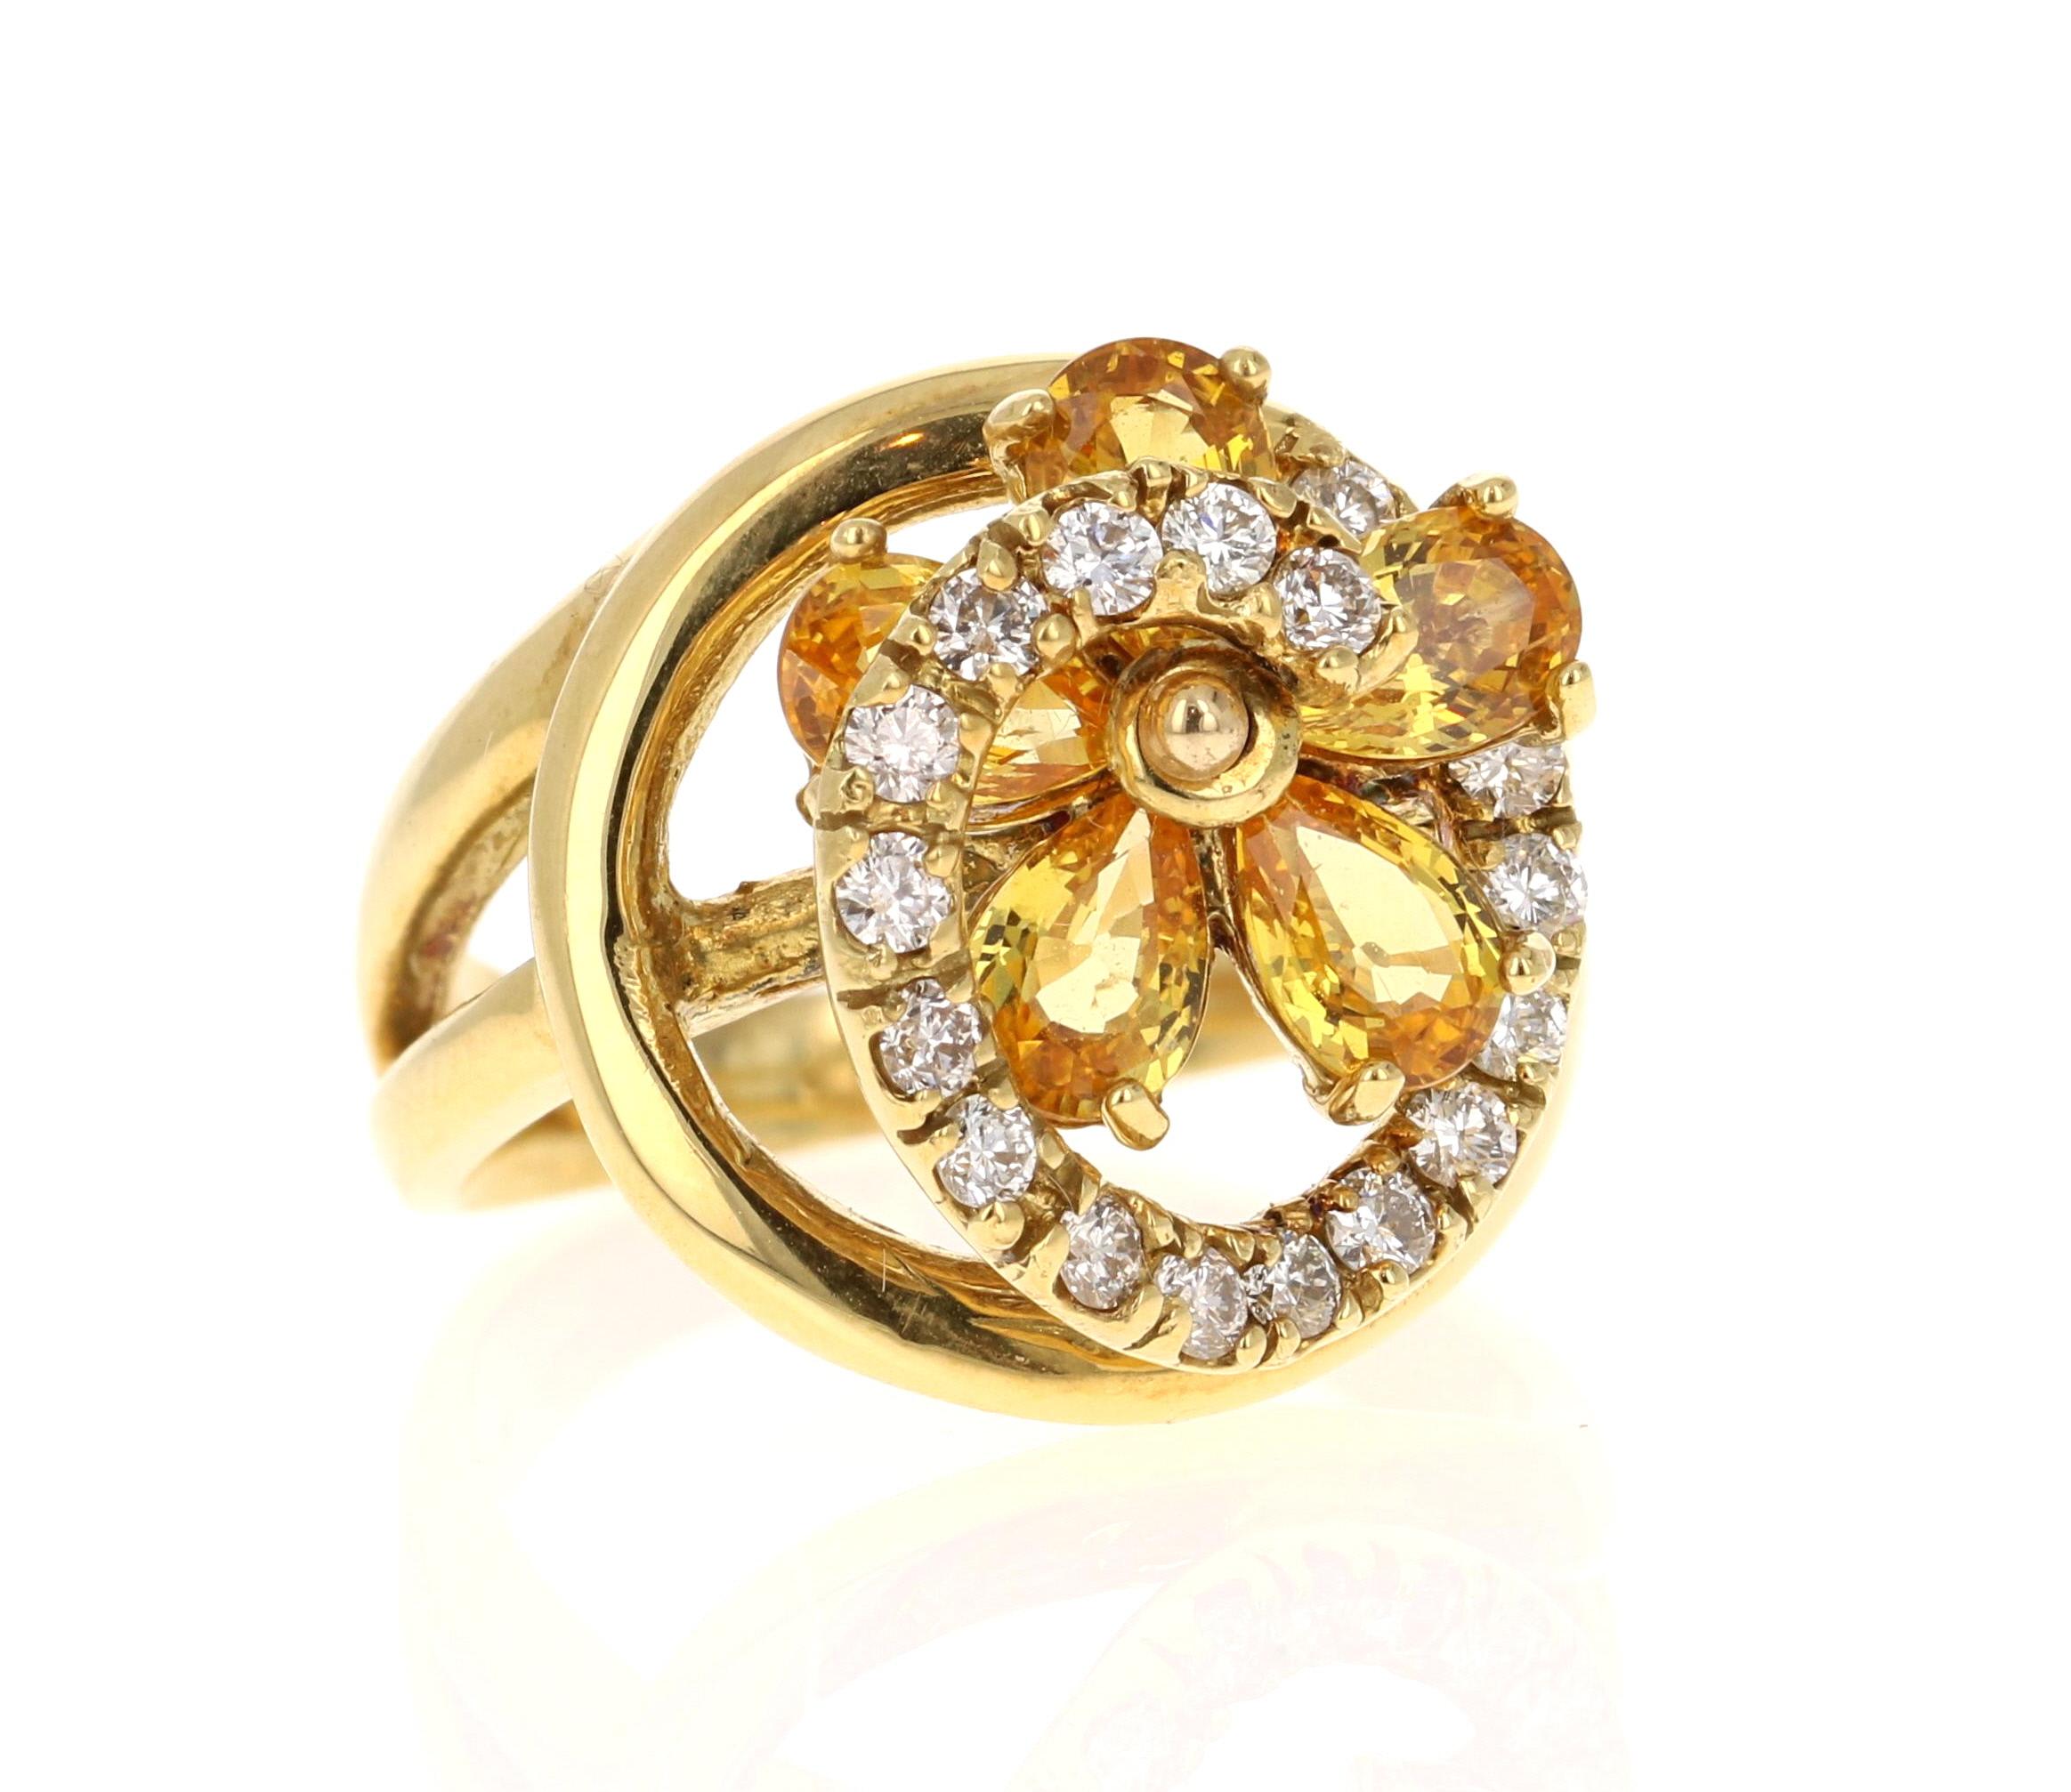 This ring has 5 Pear Cut Yellow Sapphires that weigh 2.74 Carats. It also has 18 Round Cut Diamonds that weigh 0.54 Carats. Clarity: VS and Color: H. The total carat weight of the ring is 3.28 Carats. 

The ring is beautifully set in 18K Yellow Gold